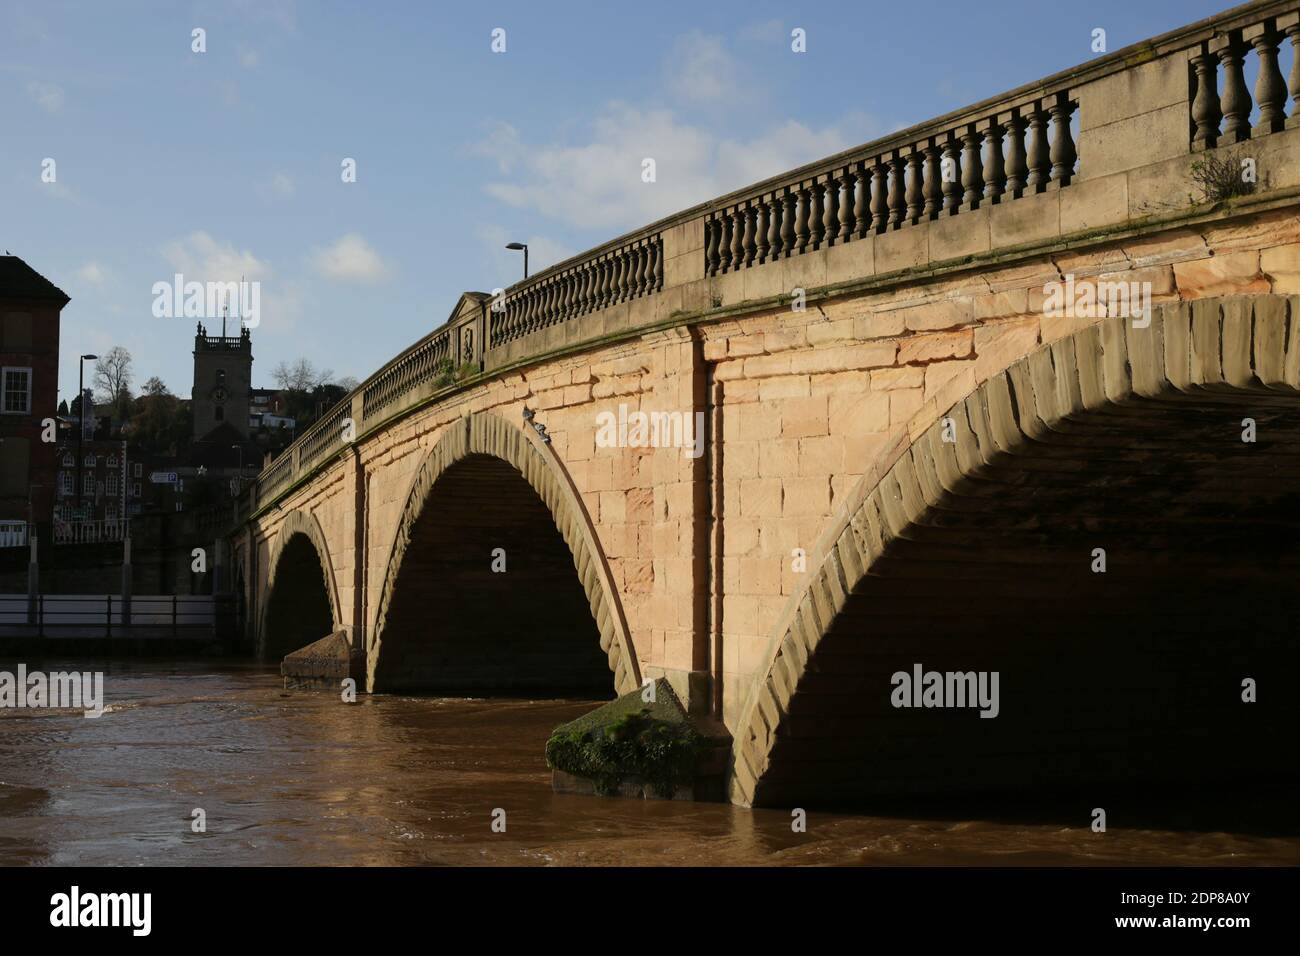 Bewdley bridge over the river Severn in Bewdley, Worcestershire, England, UK. Stock Photo